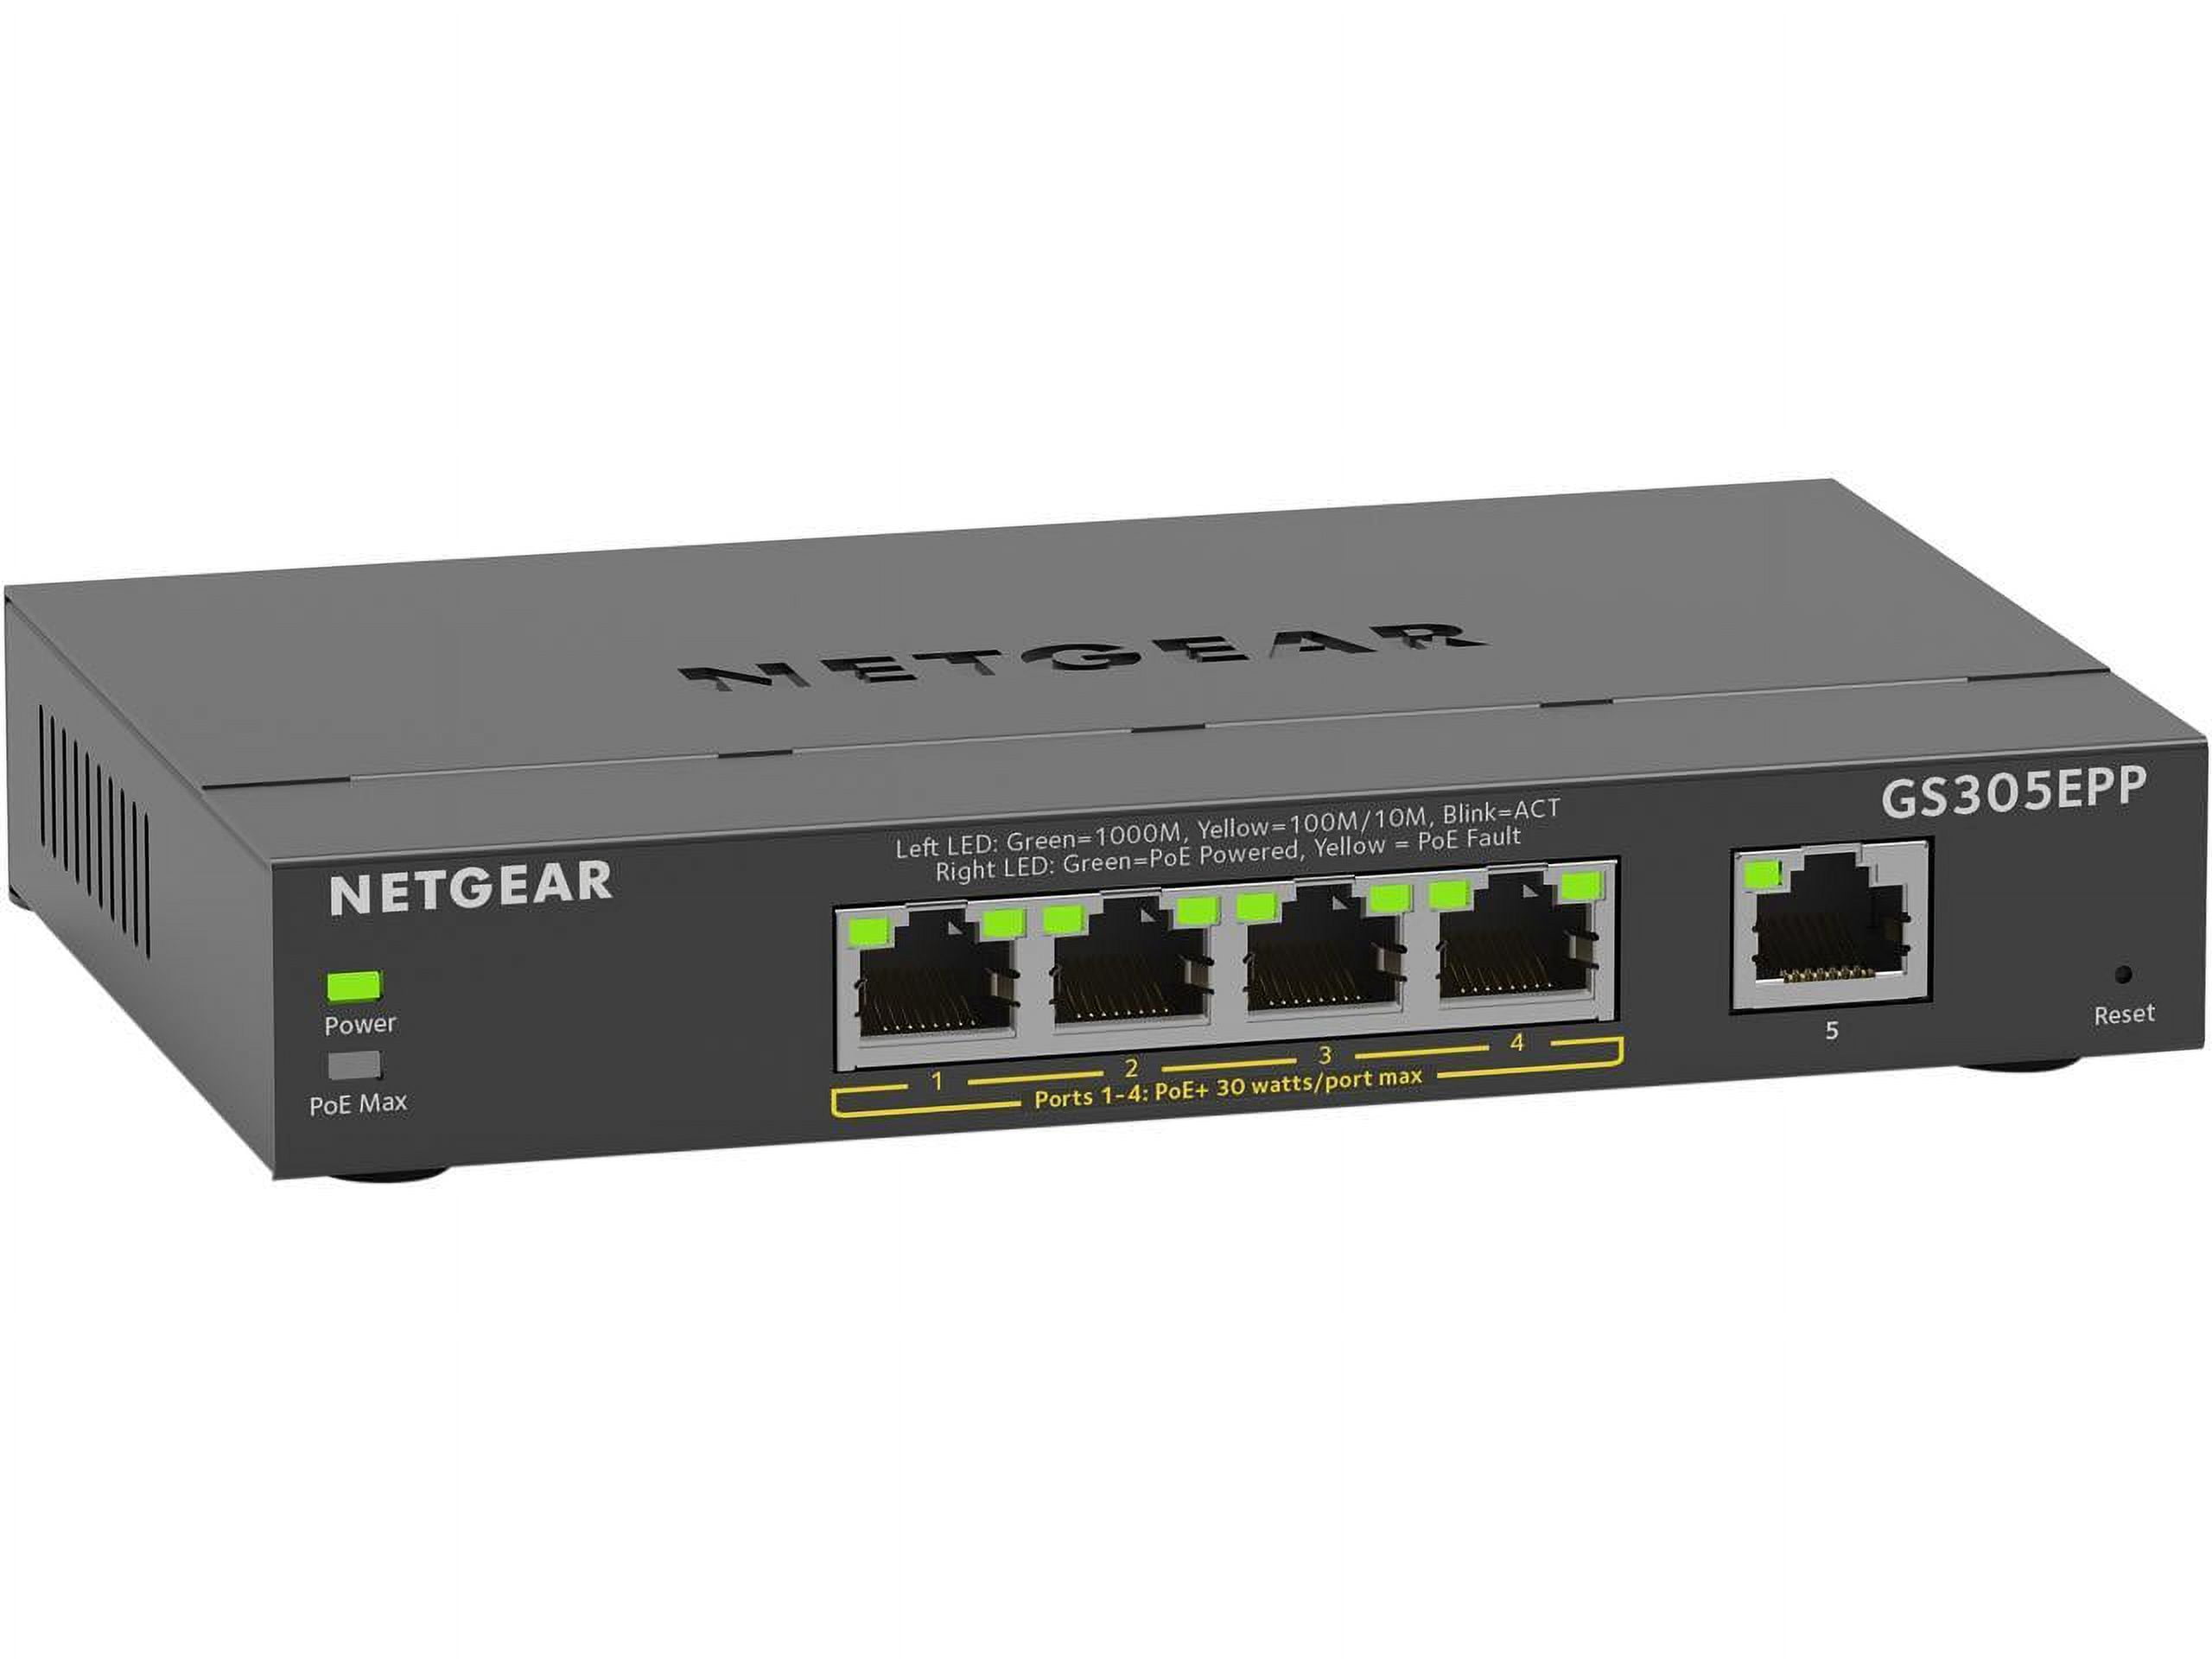 Picture of Netgear GS305EPP-100NAS 5 Port GB HP PoE Smart Plus Smart Managed Switch